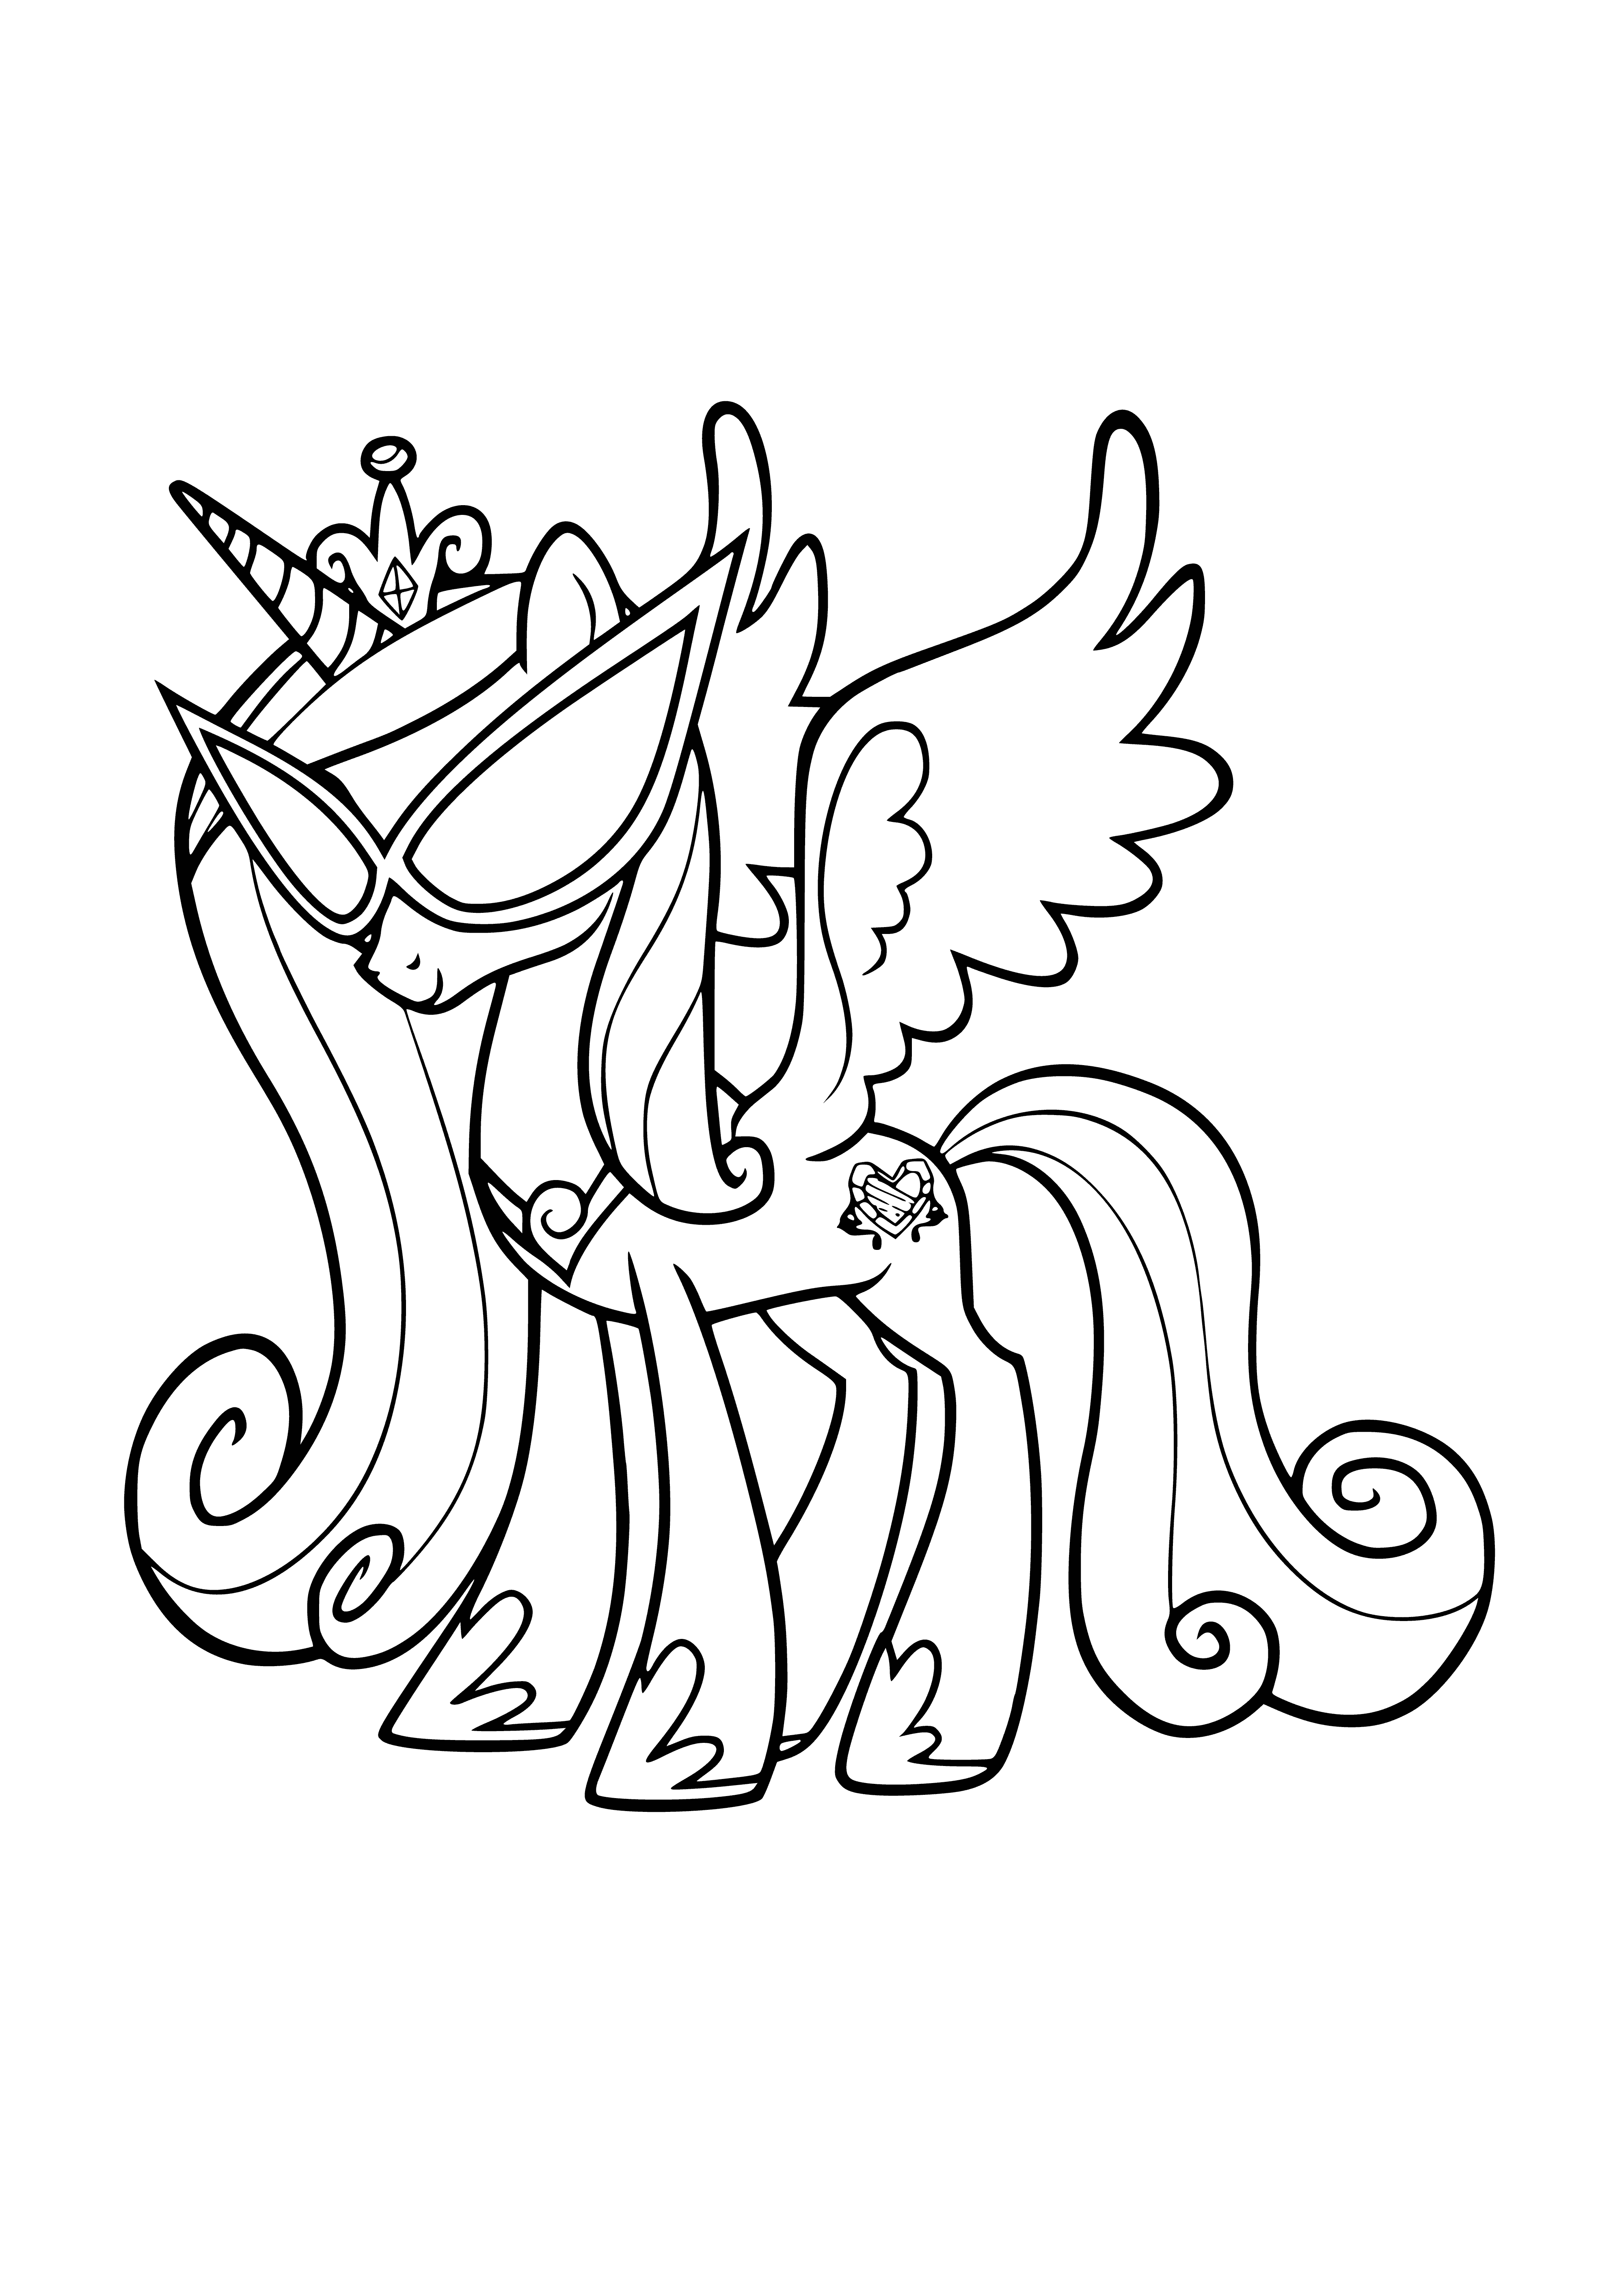 coloring page: Princess in a pink dress wearing a pearl necklace and tiara, with long, flowing hair.